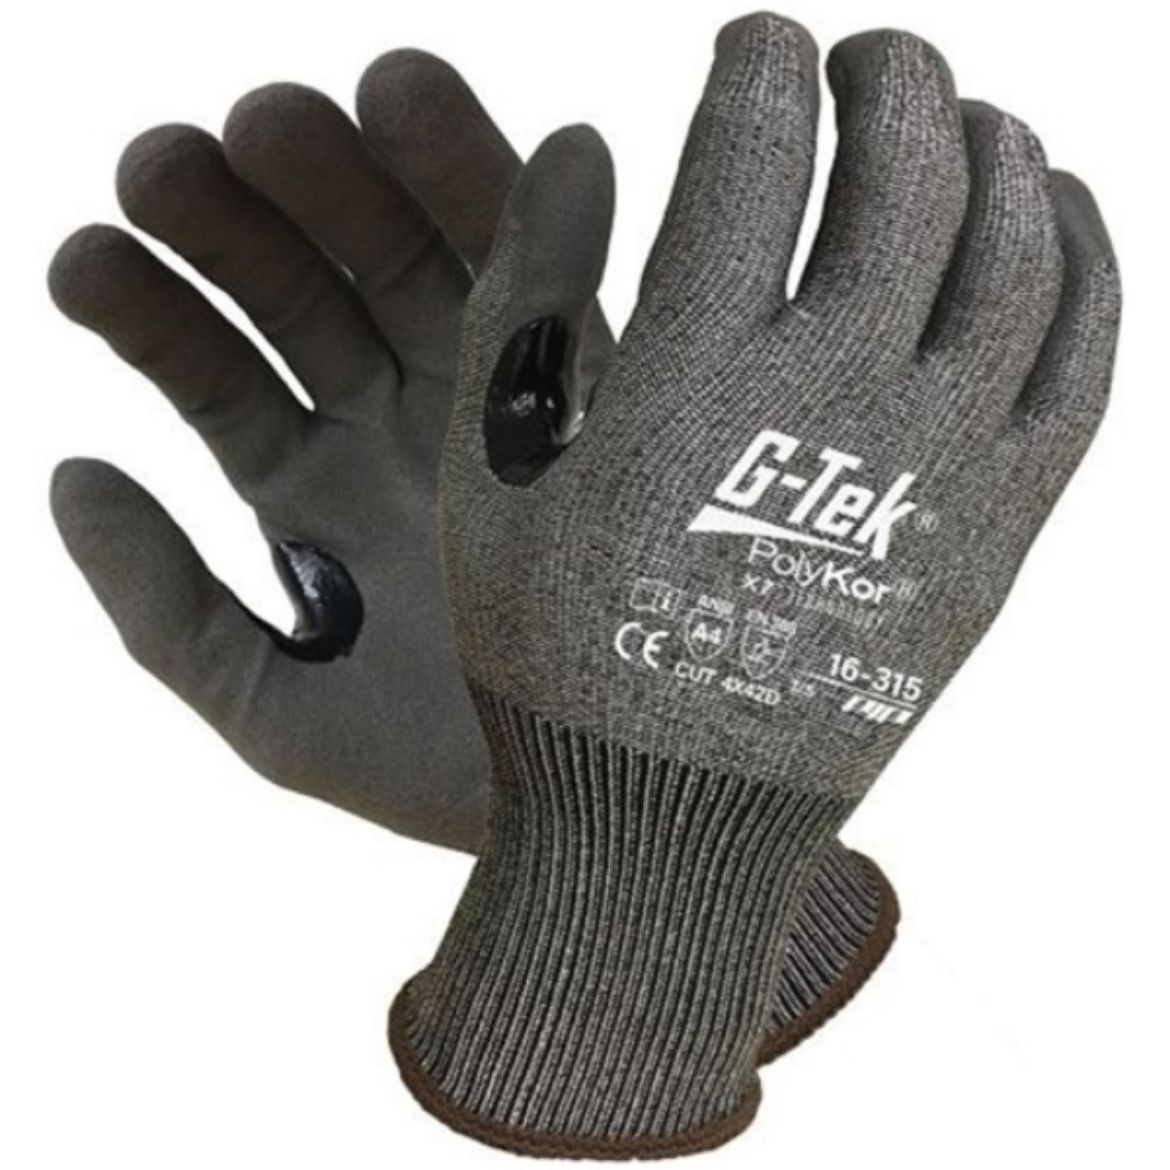 Picture of G-TEK (GUARDTEK) POLYKOR X7 CUT D GLOVES. AVAILABLE IN SIZES 6 TO 12.